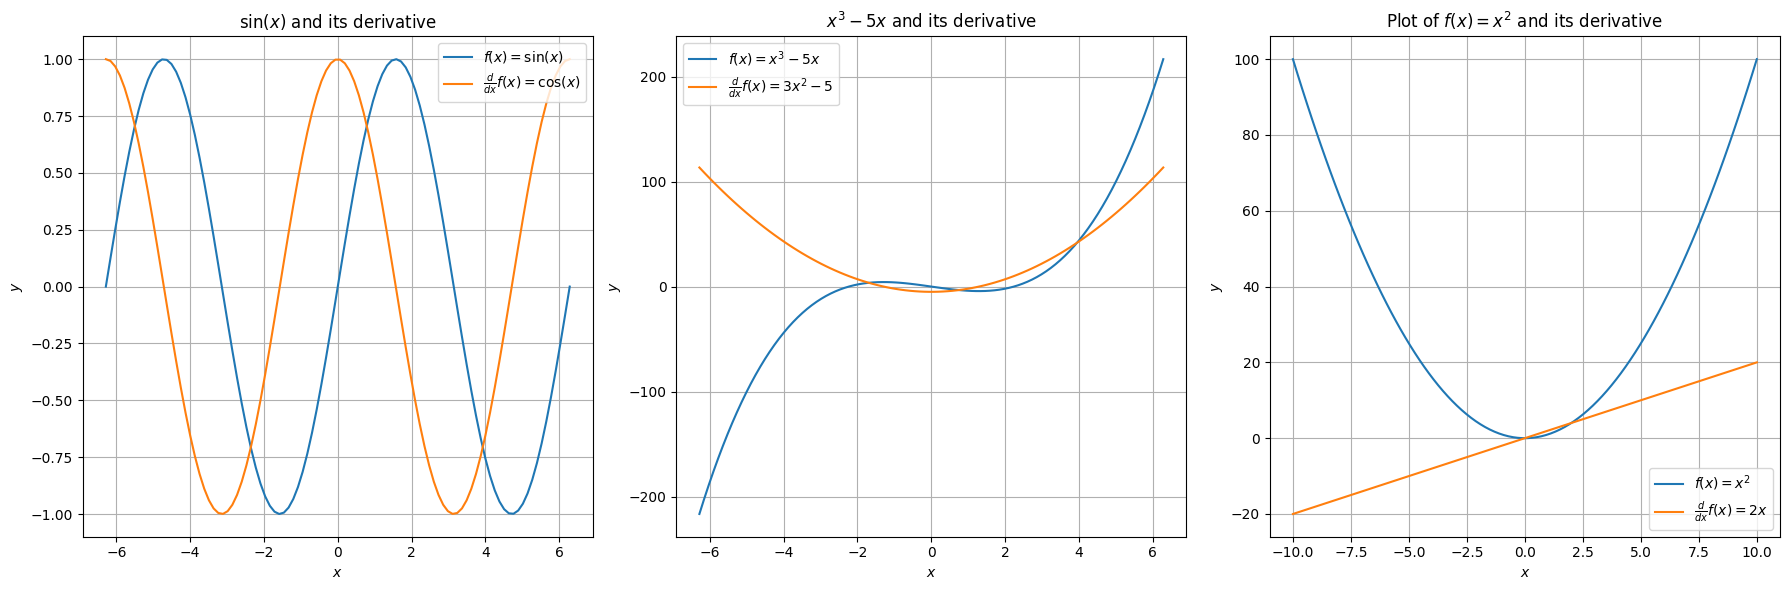 Differentiable Functions